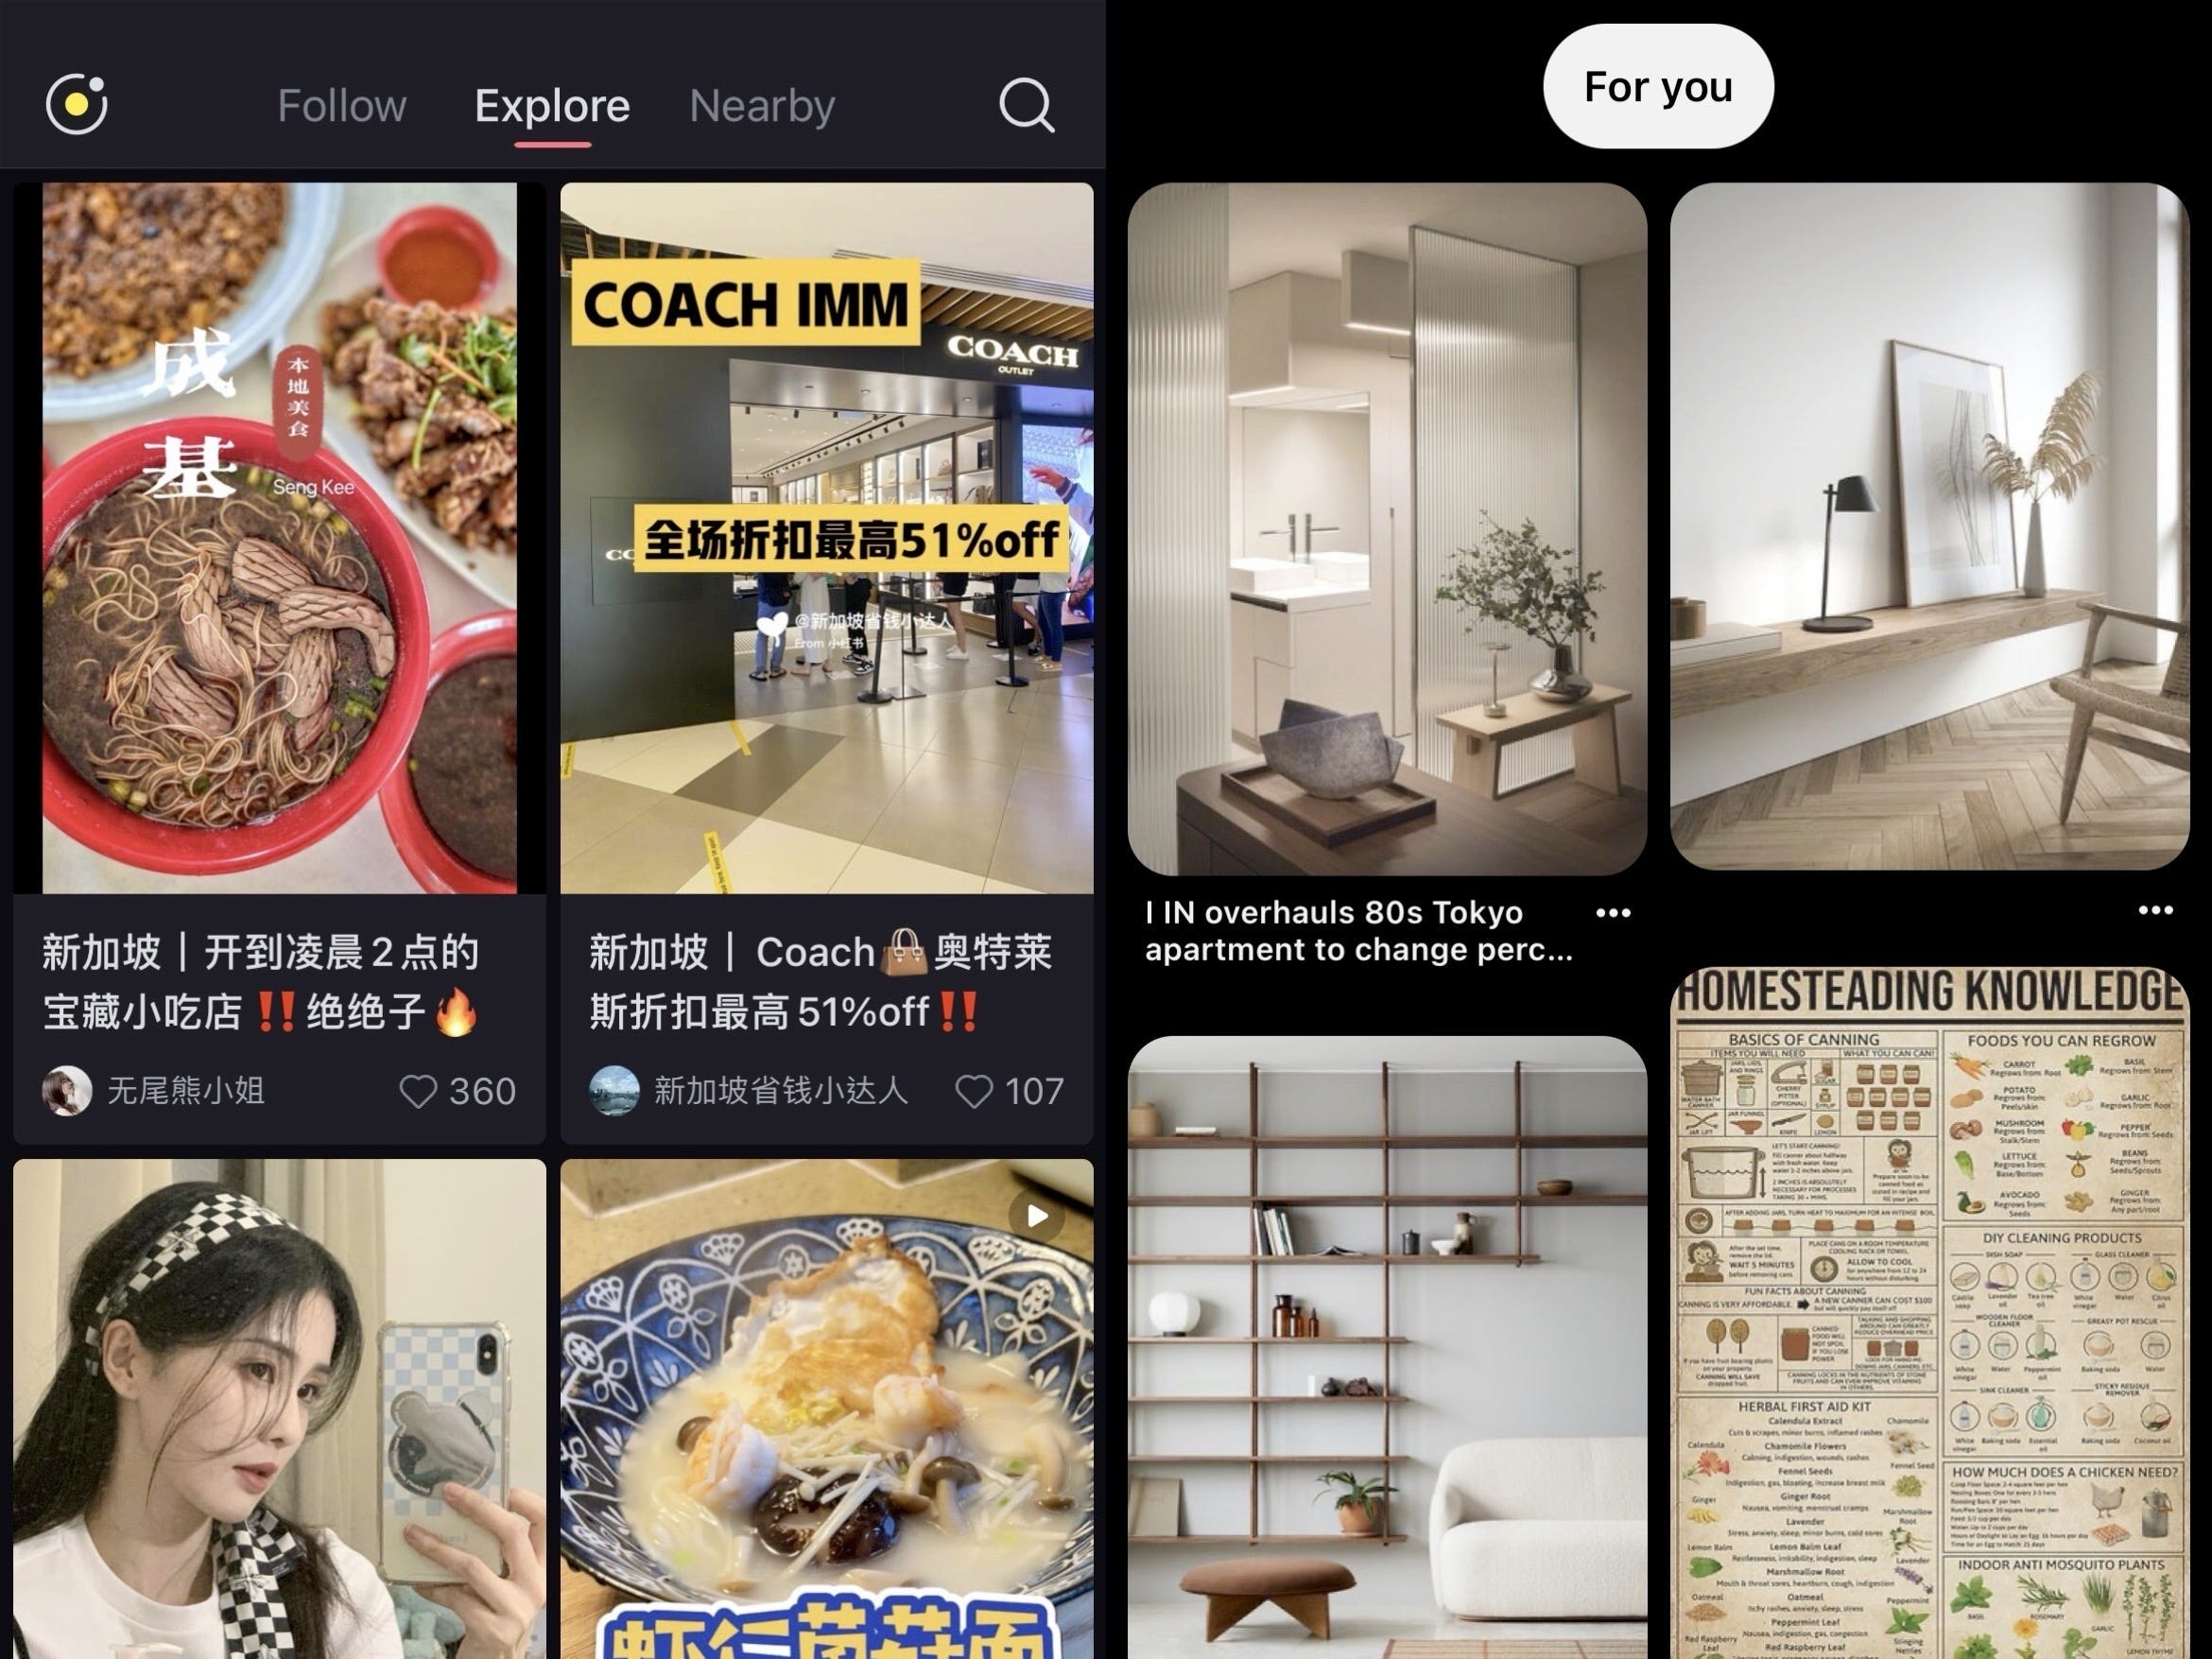 Comparing the Xiaohongshu interface (left) with Pinterest's (right).